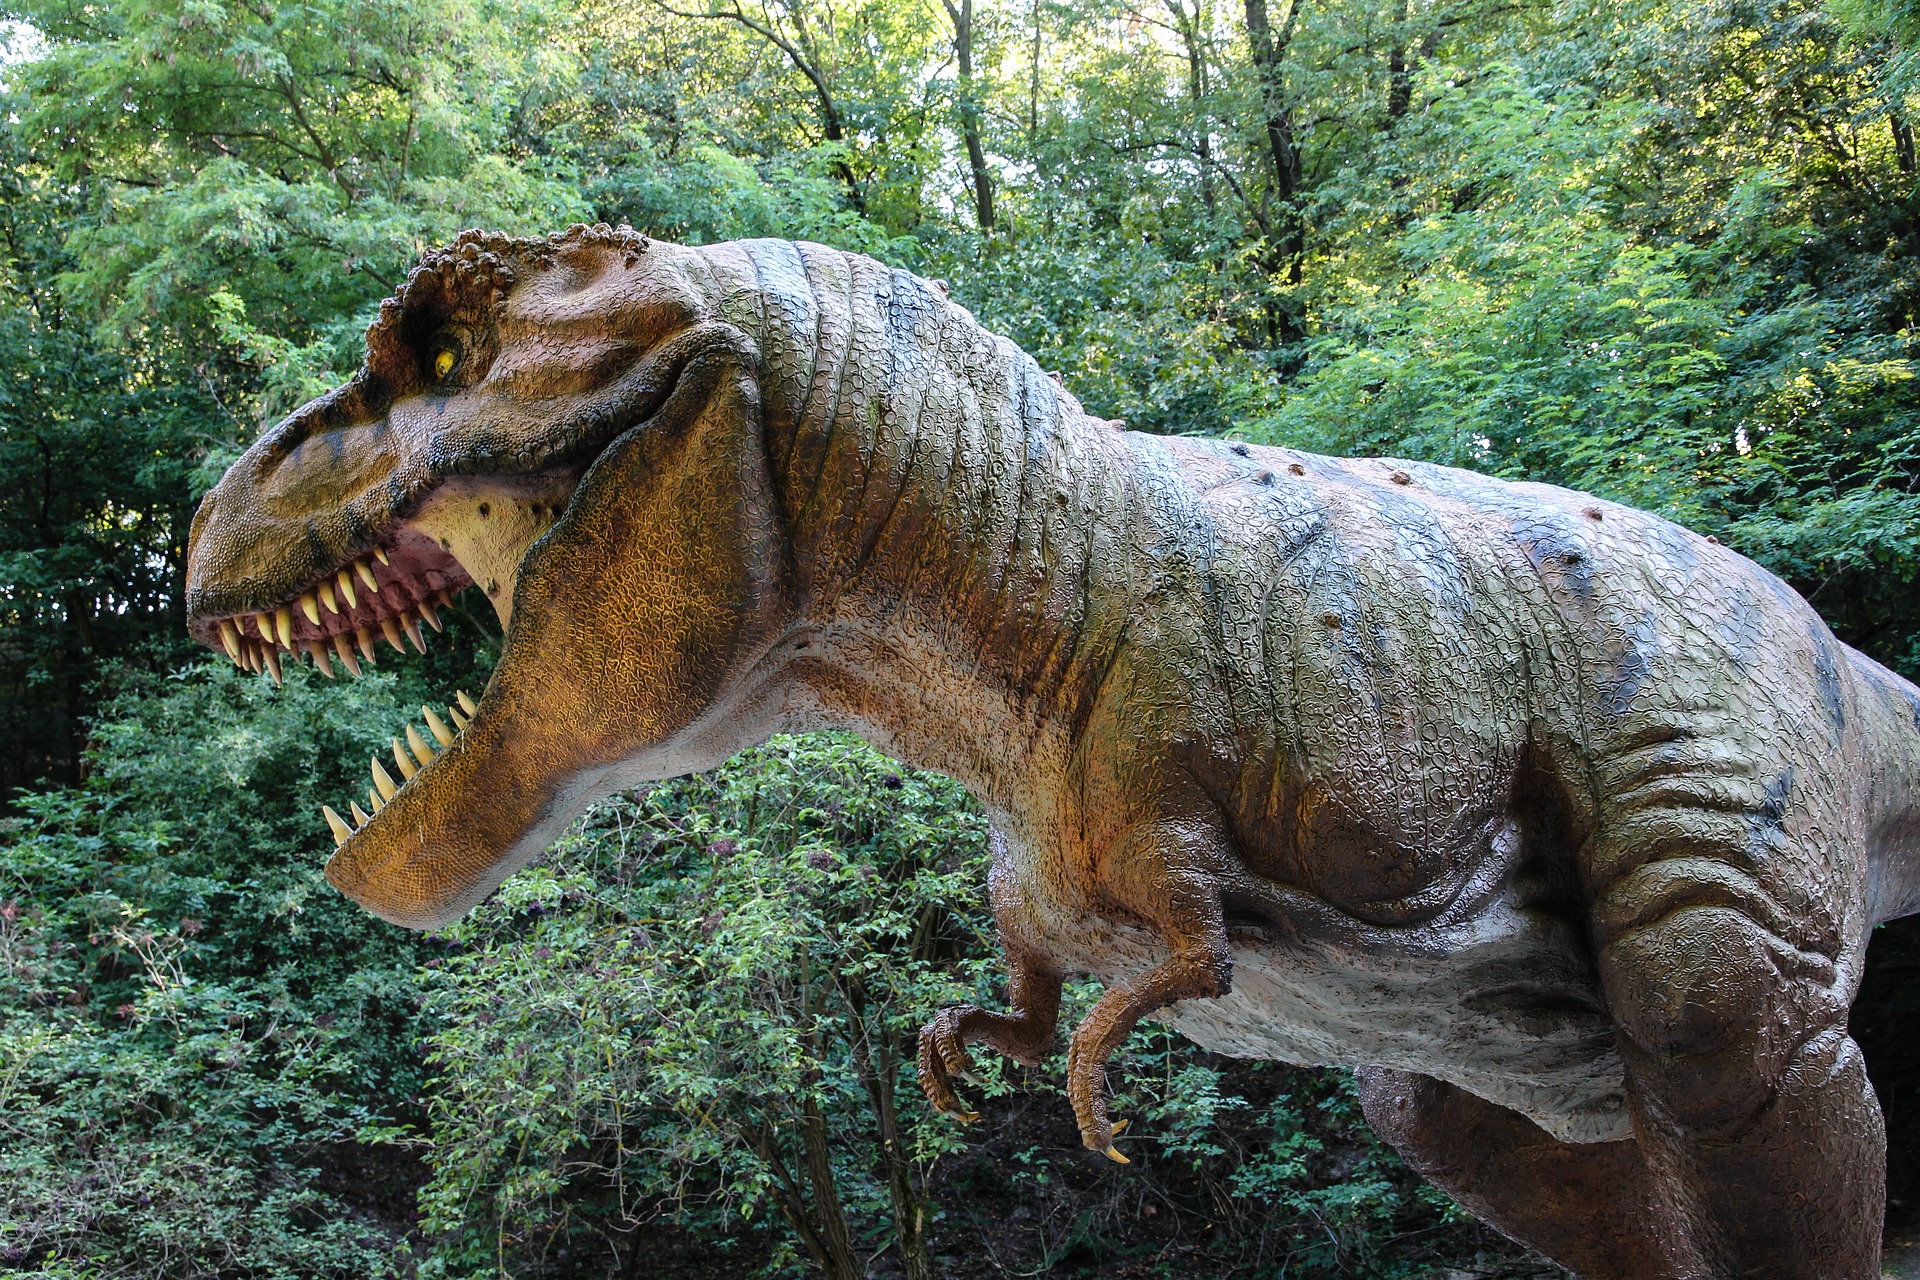 View, Download, Rate, and Comment on this Dino Park Tyrannosaurus Rex Image...